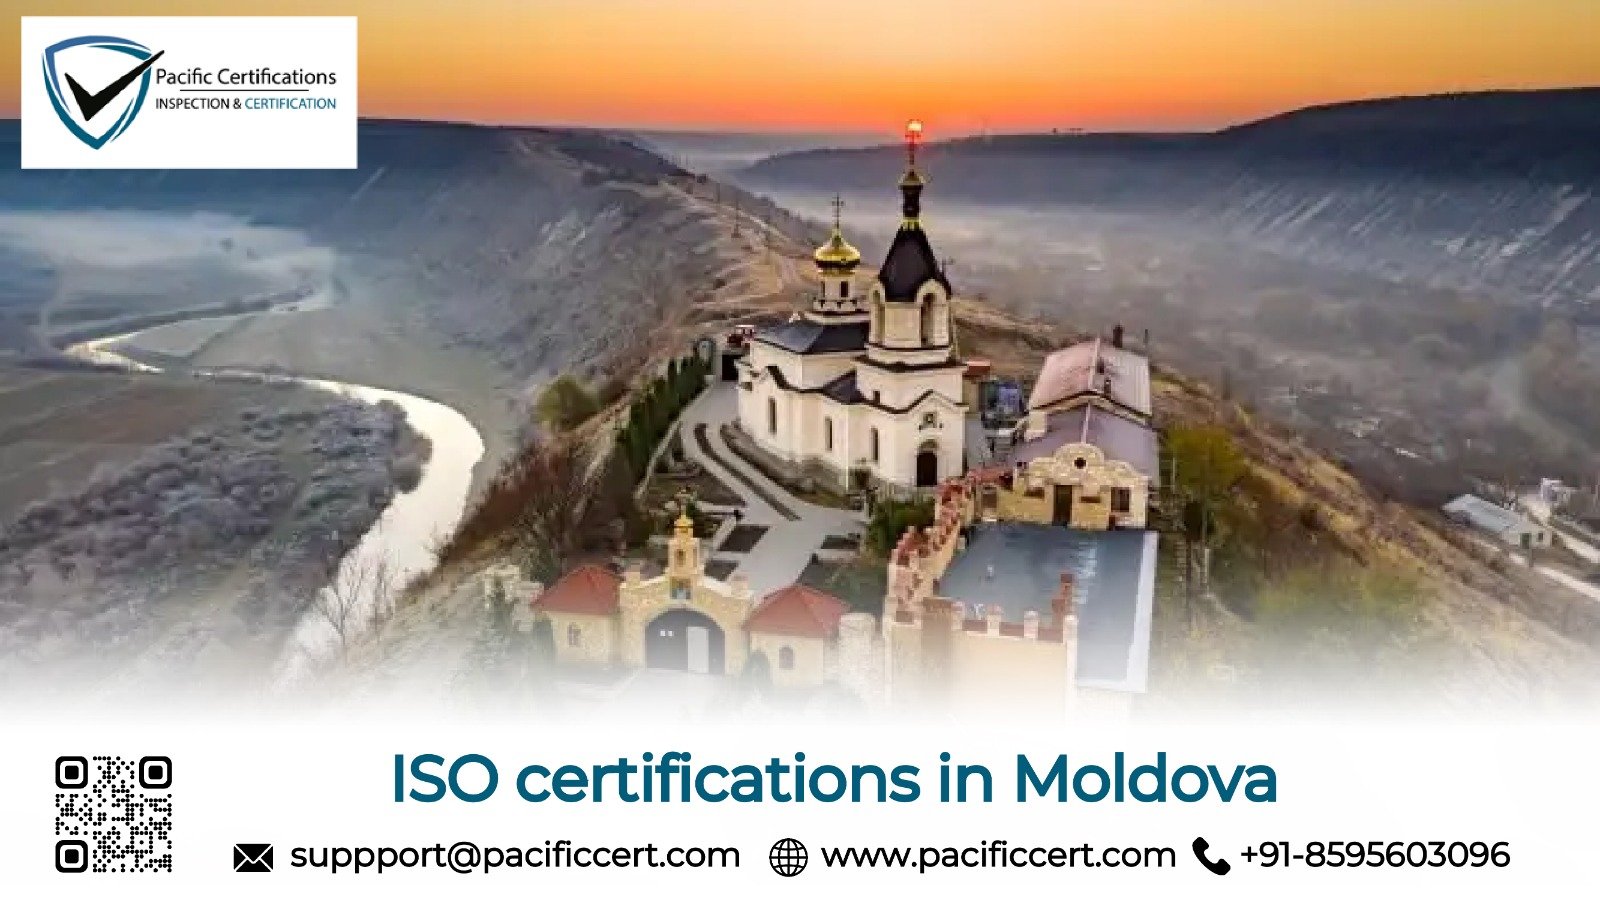 ISO Certifications in Moldova | Pacific Certifications